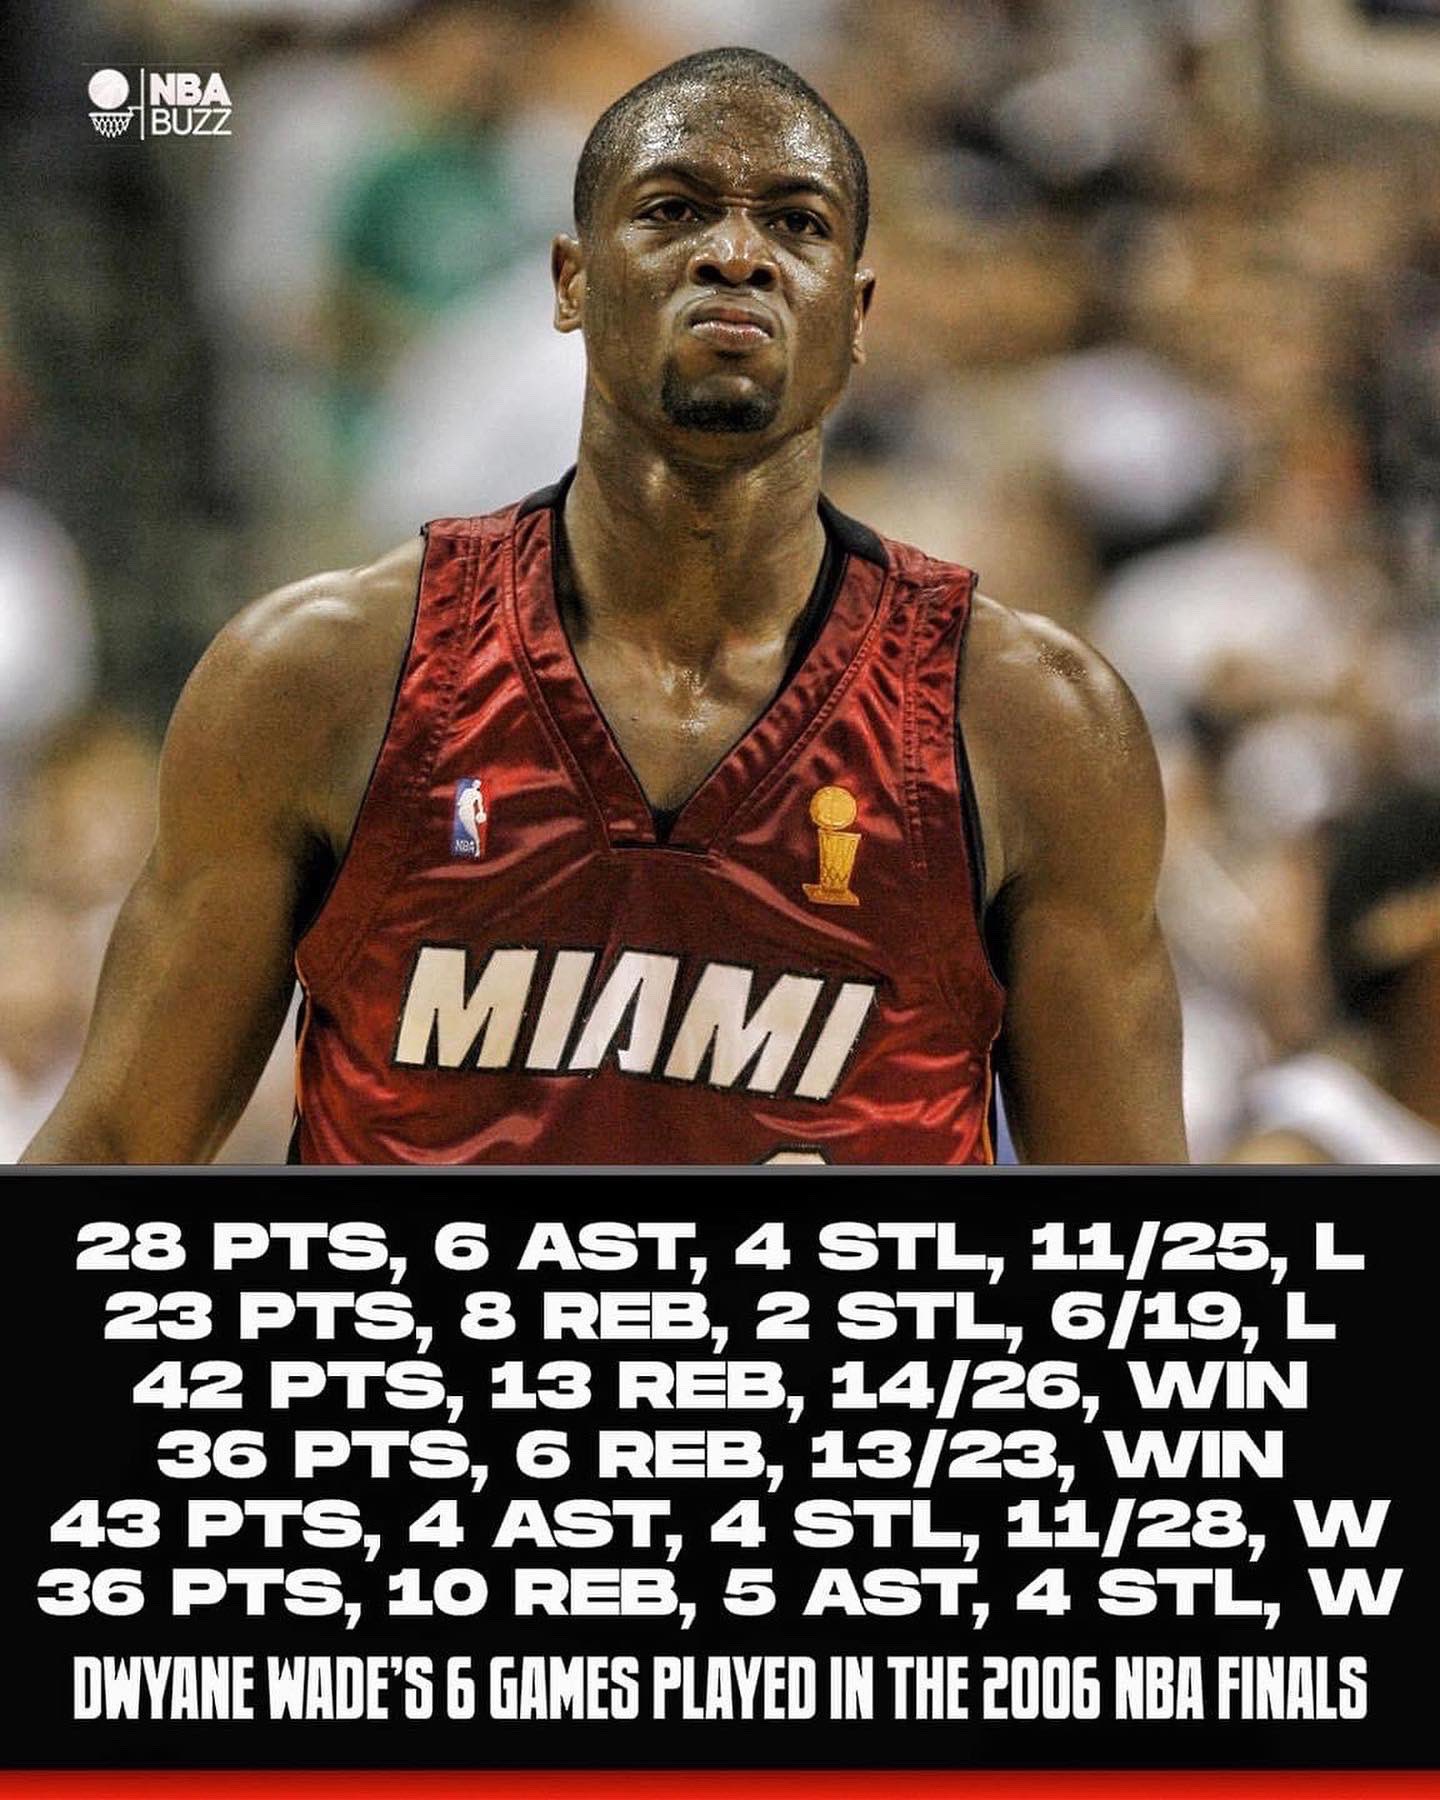 Miami Heat - On this day in 2006, ⚡️ Dwyane Wade ⚡️ scored 43